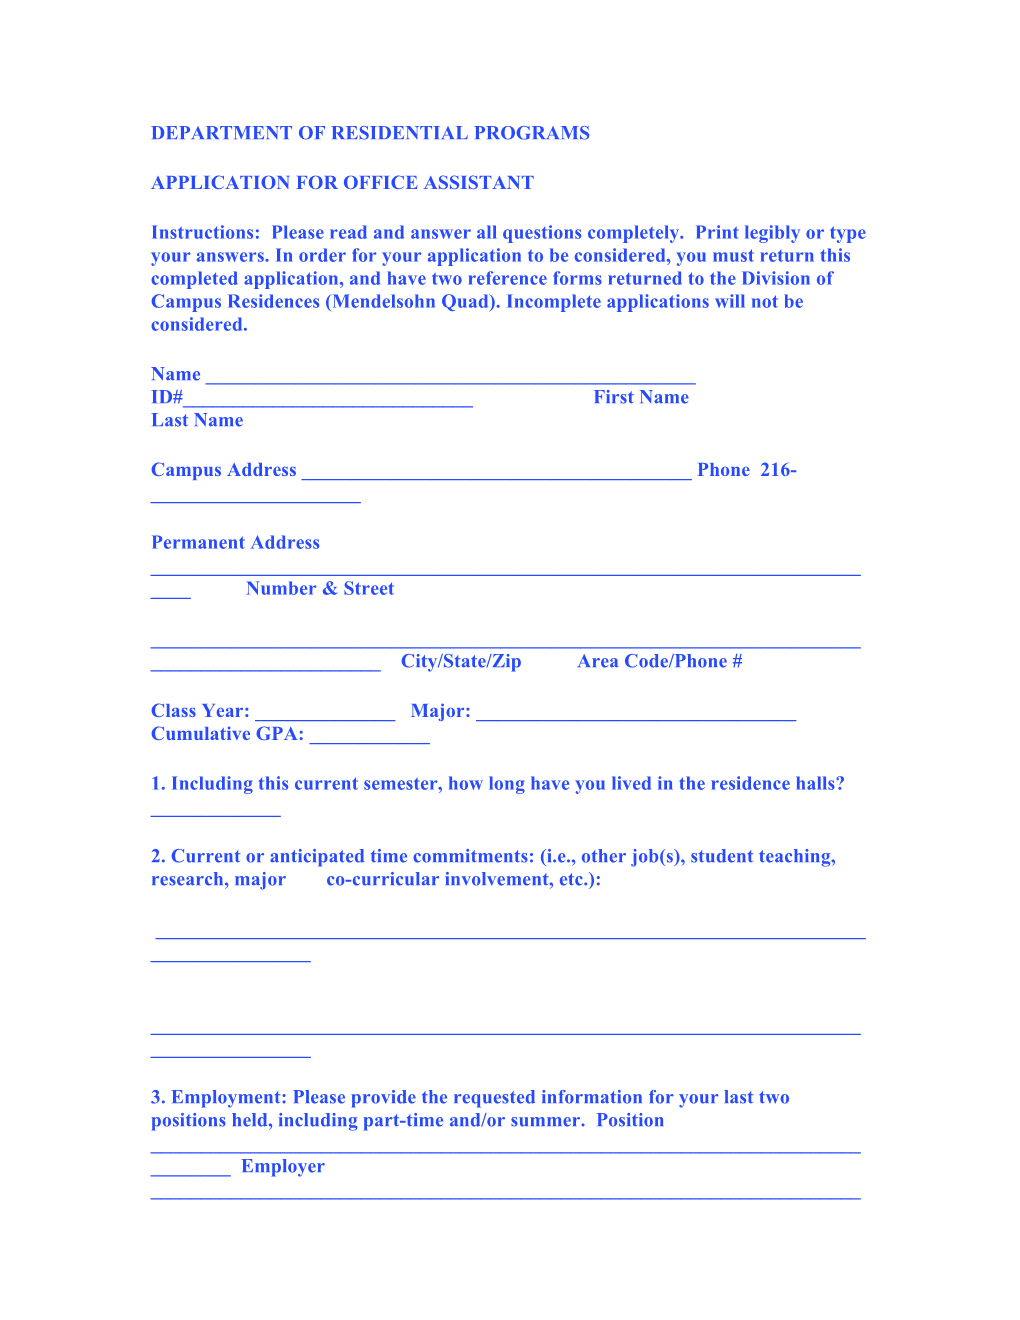 Application for Office Assistant